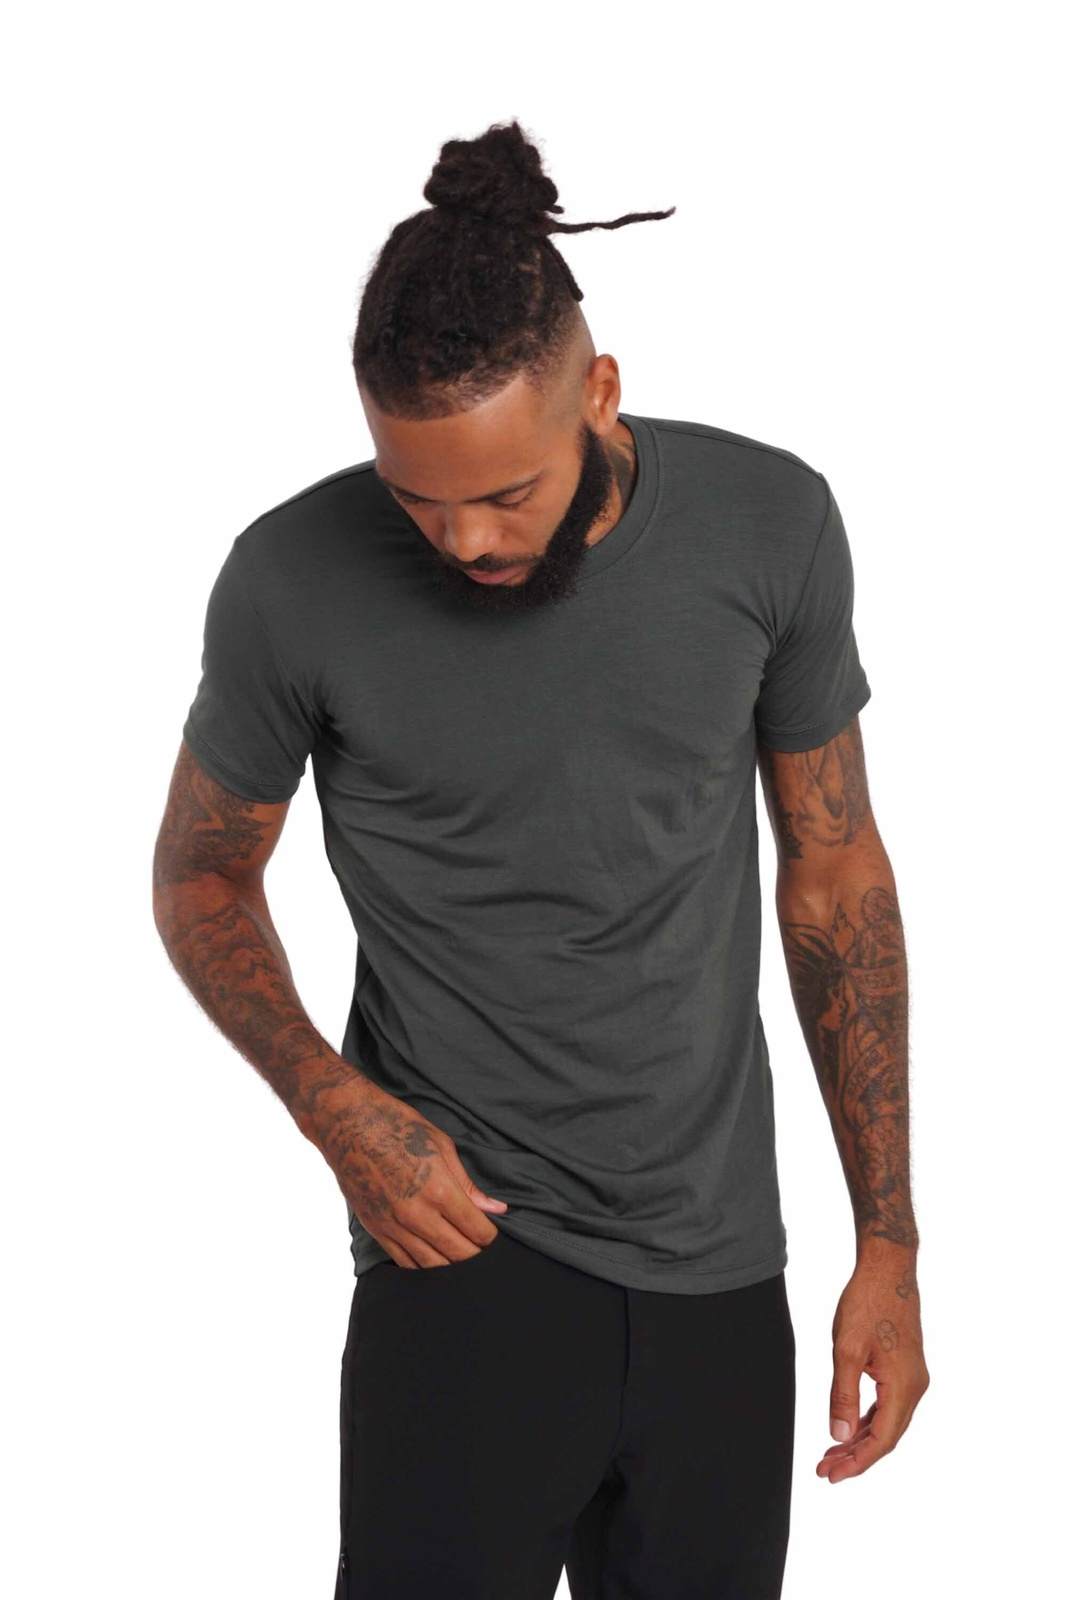 Crew neck mens muscle fit t shirt in steel grey from Ekoluxe.